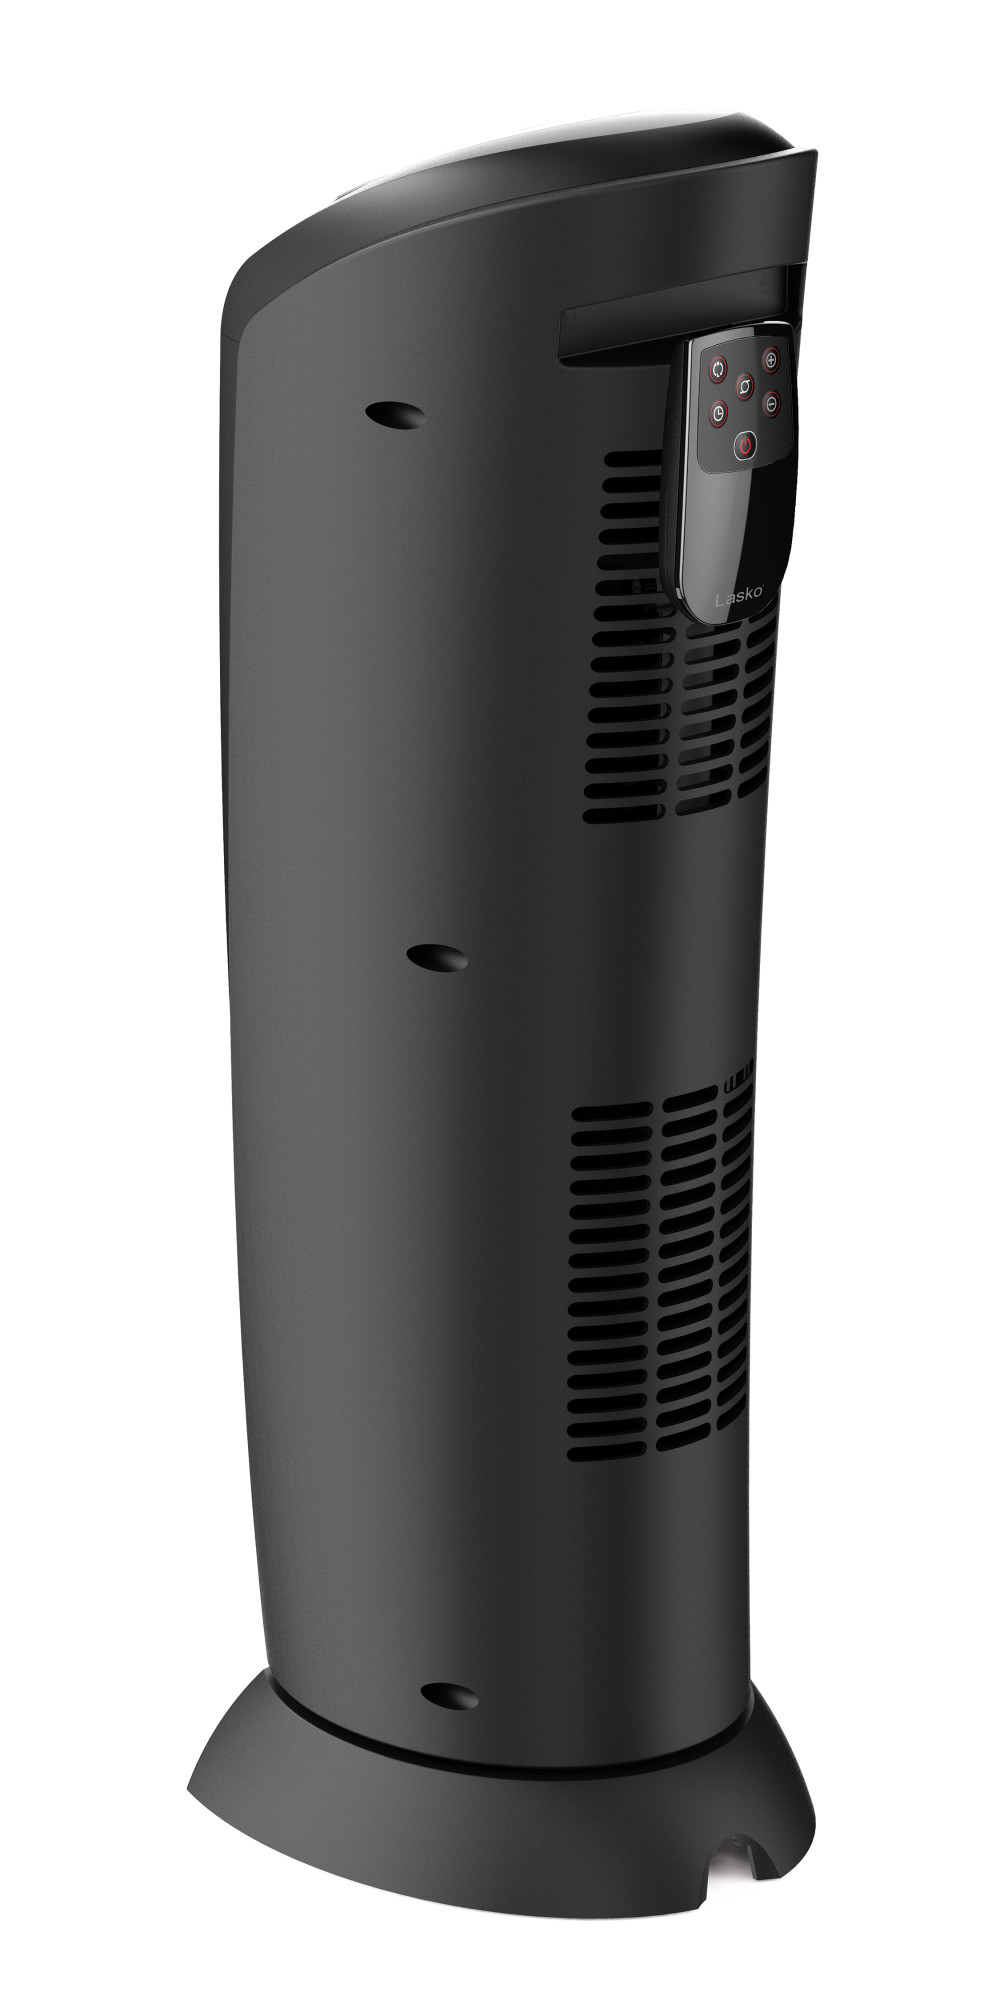 Lasko 22.5" 1500W Oscillating Ceramic Tower Space Heater with Remote, Black, CT22410, New - image 4 of 7